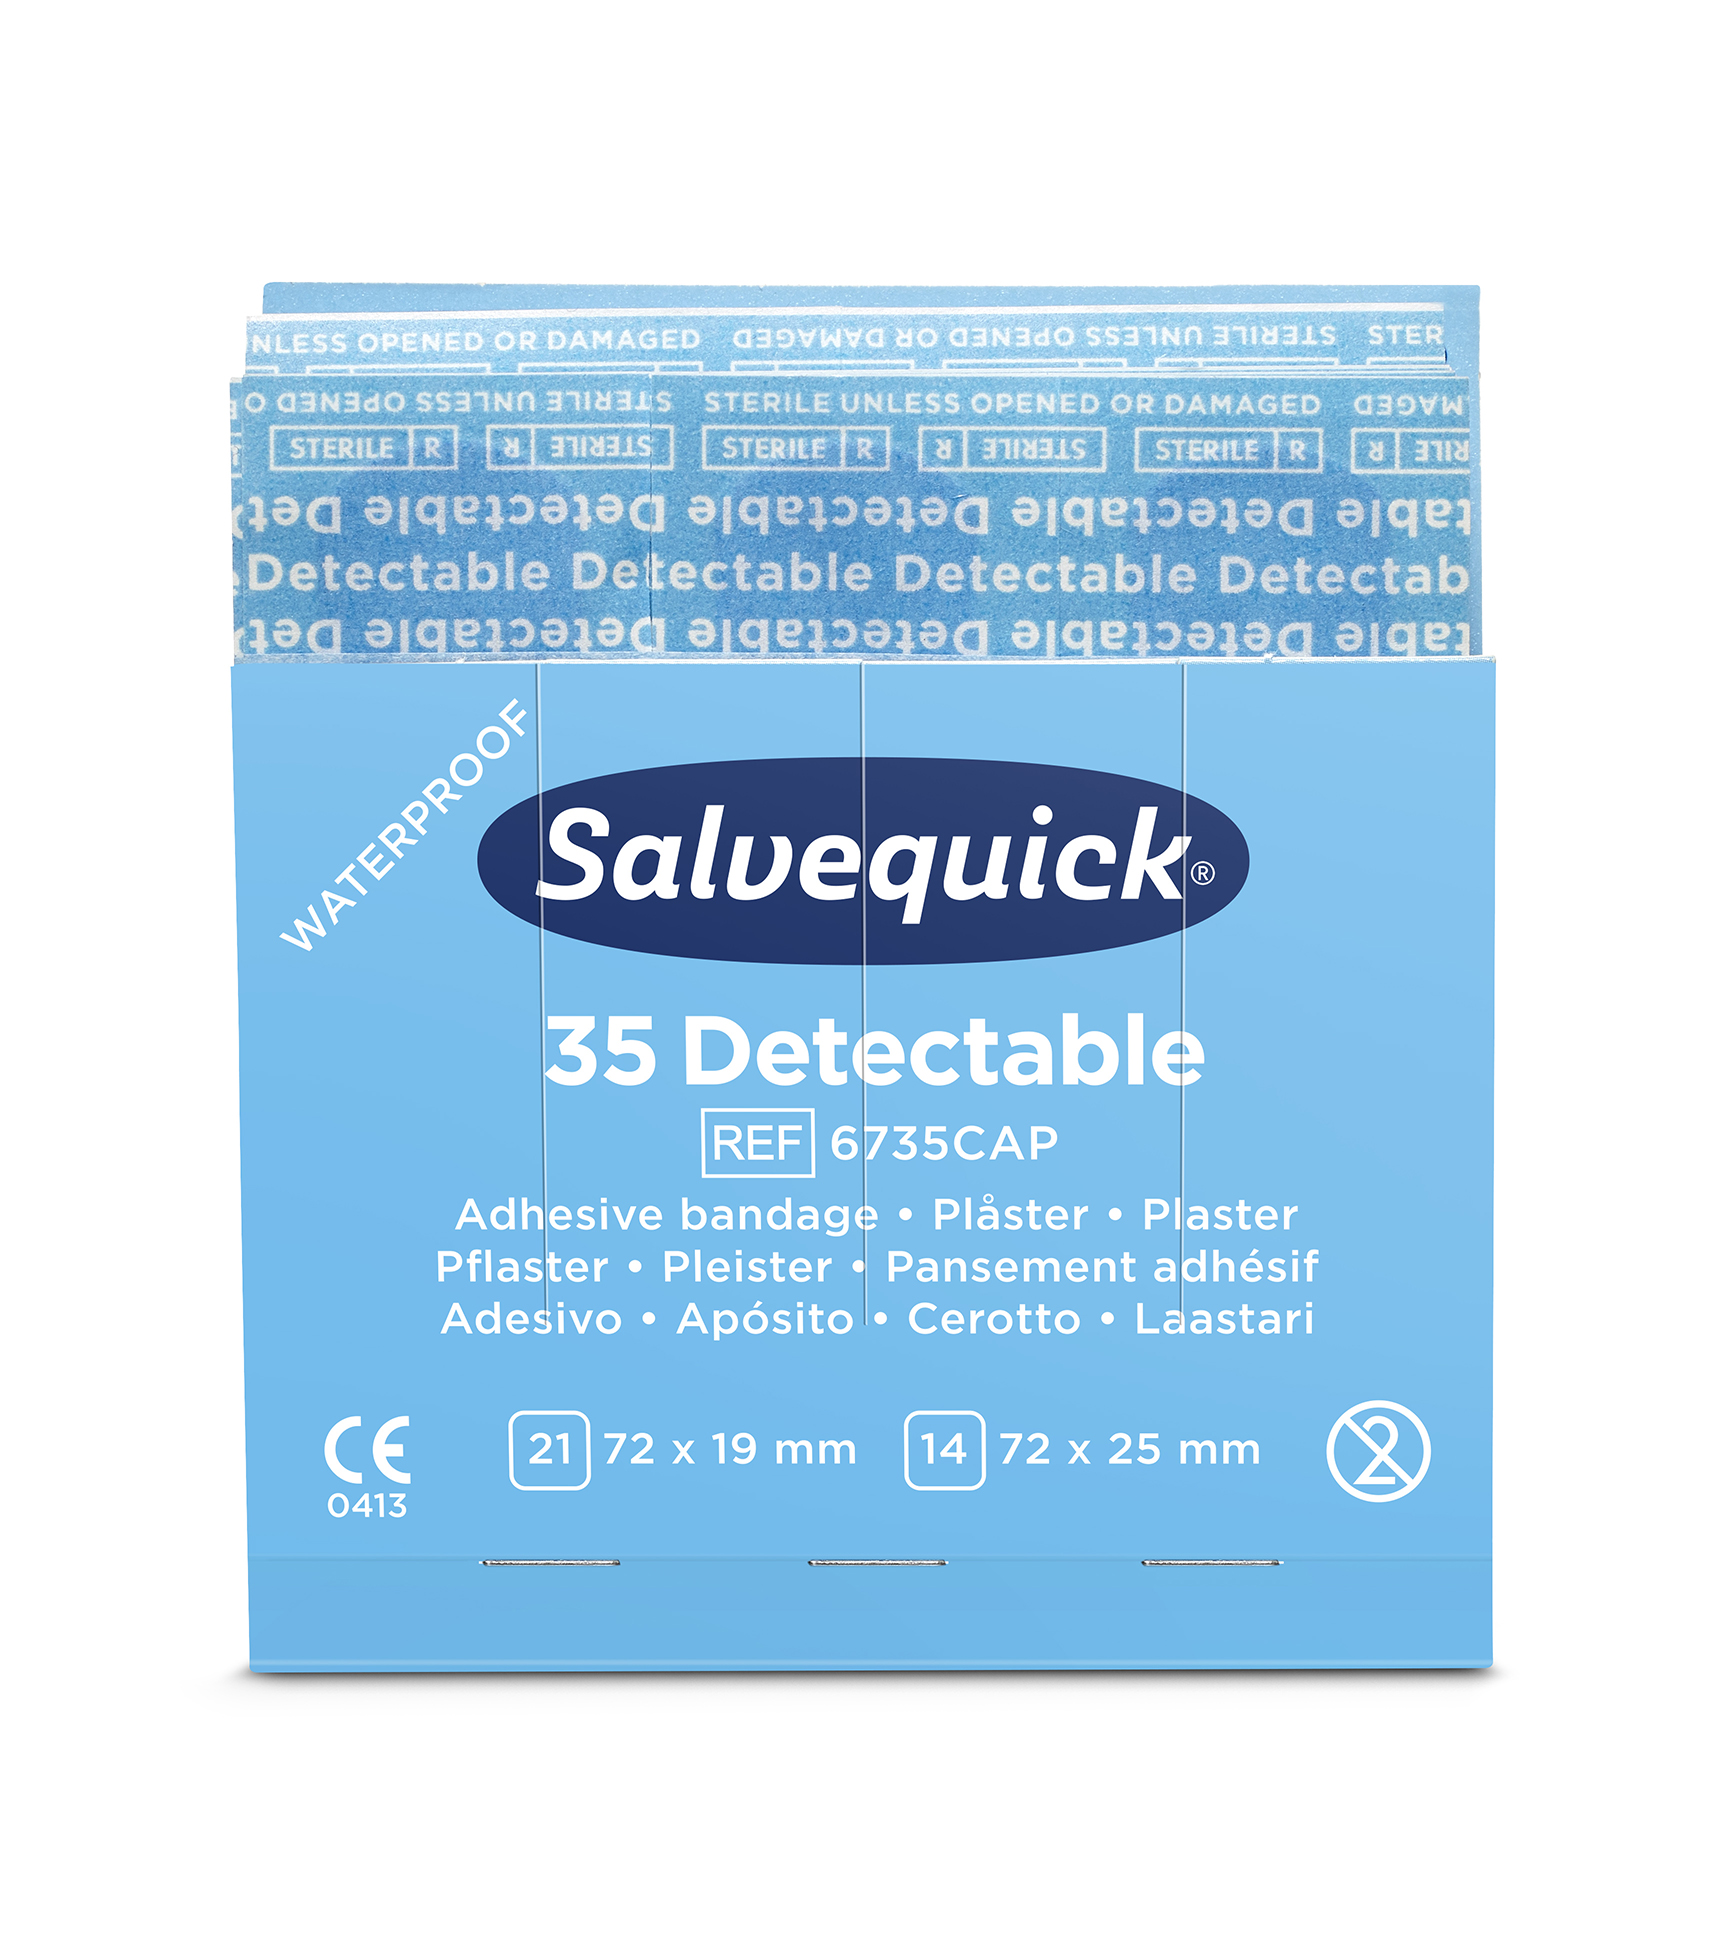 Salvequick Blue Detectable Pflaster - Refill 6735